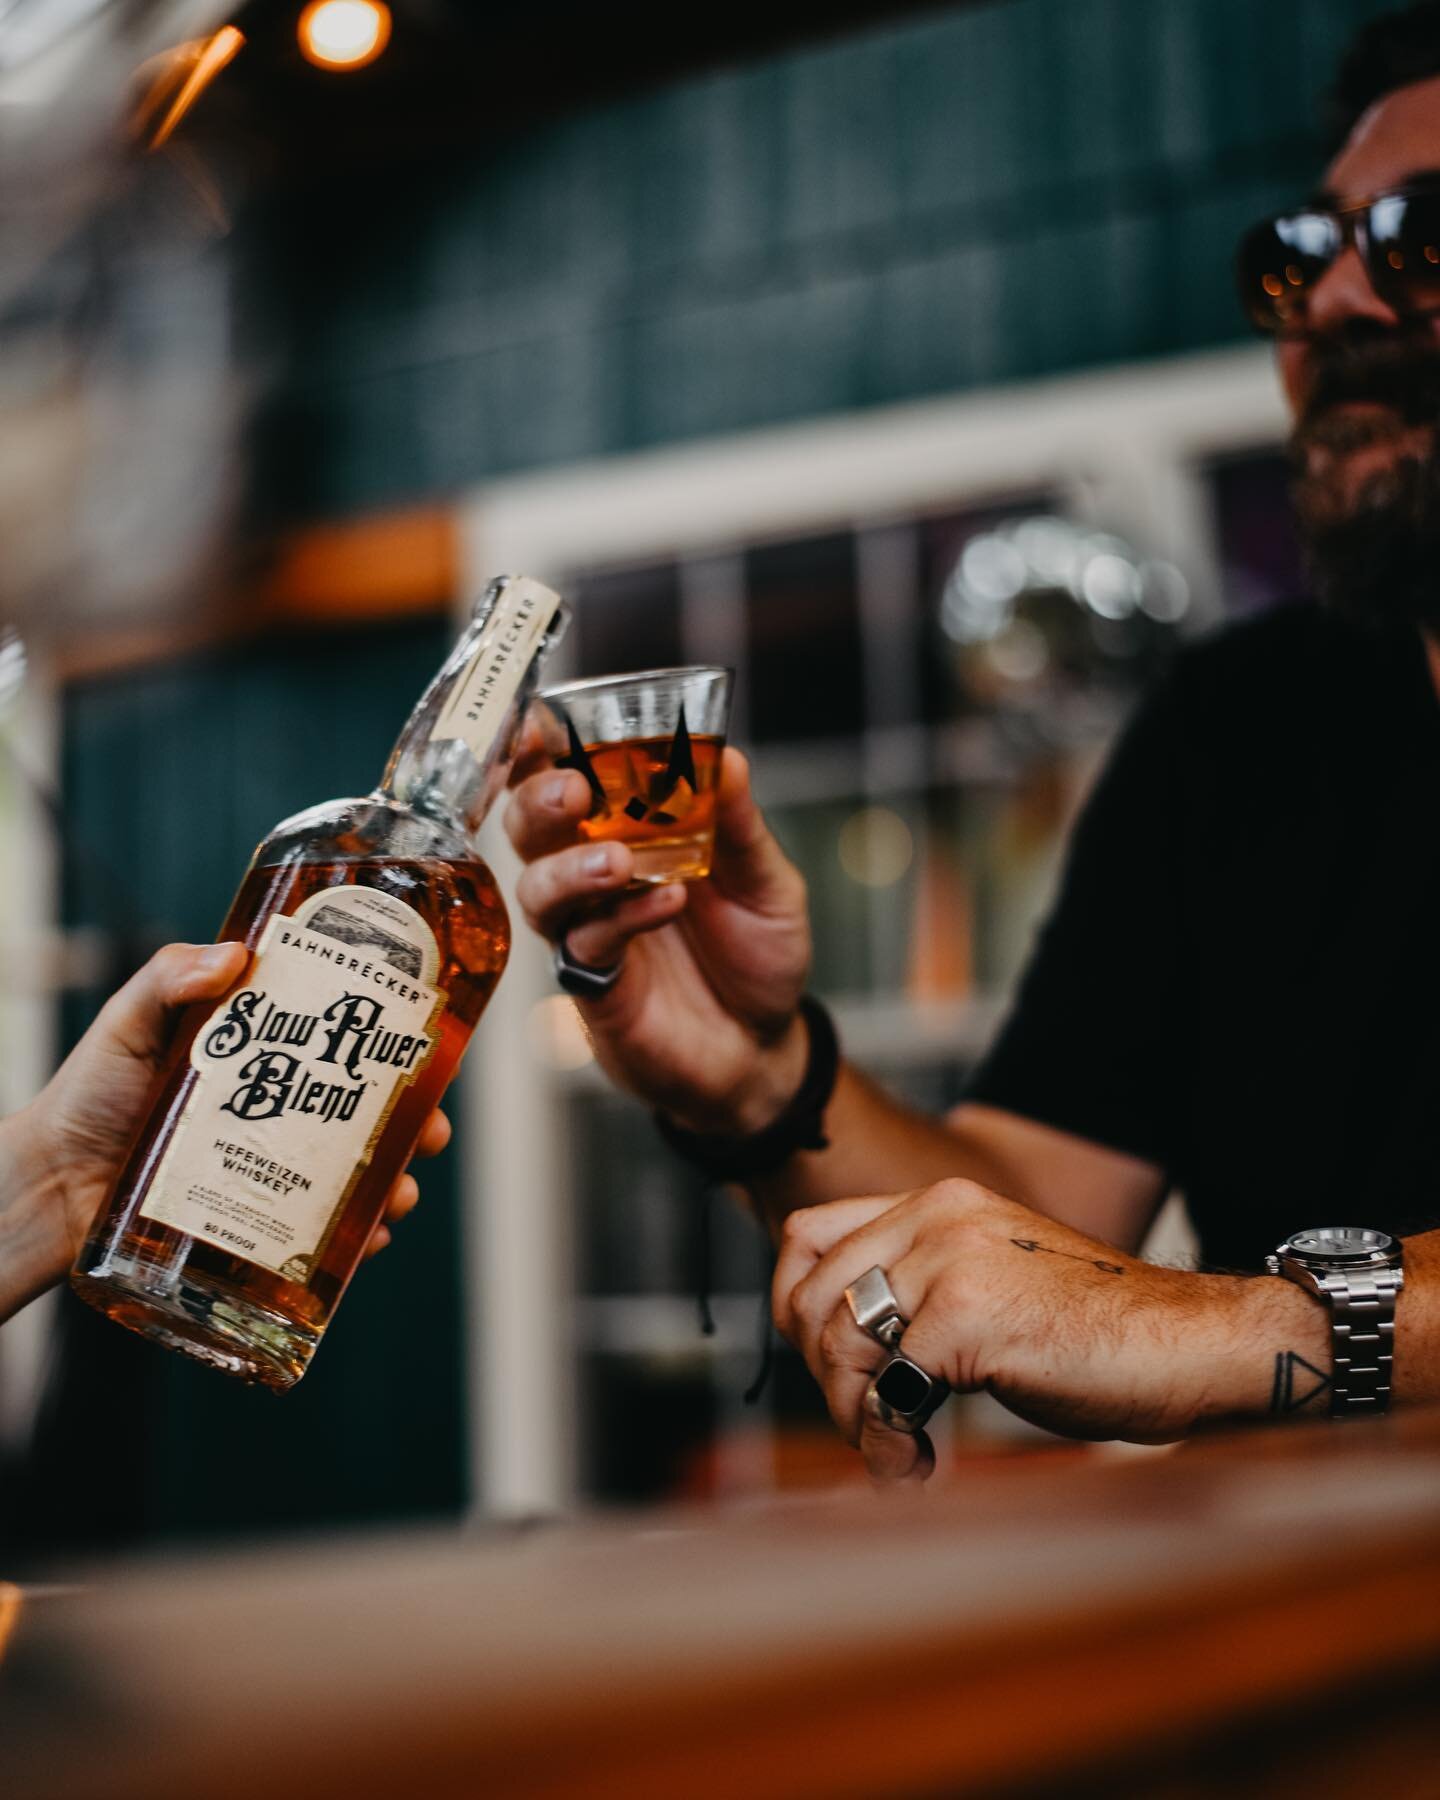 Happy Labor Day! A weekend well spent enjoying some Slow River Blend!

#bahnbrecker #areyouabahnbrecker #slowriverblend #whiskey #hefeweizenwhiskey